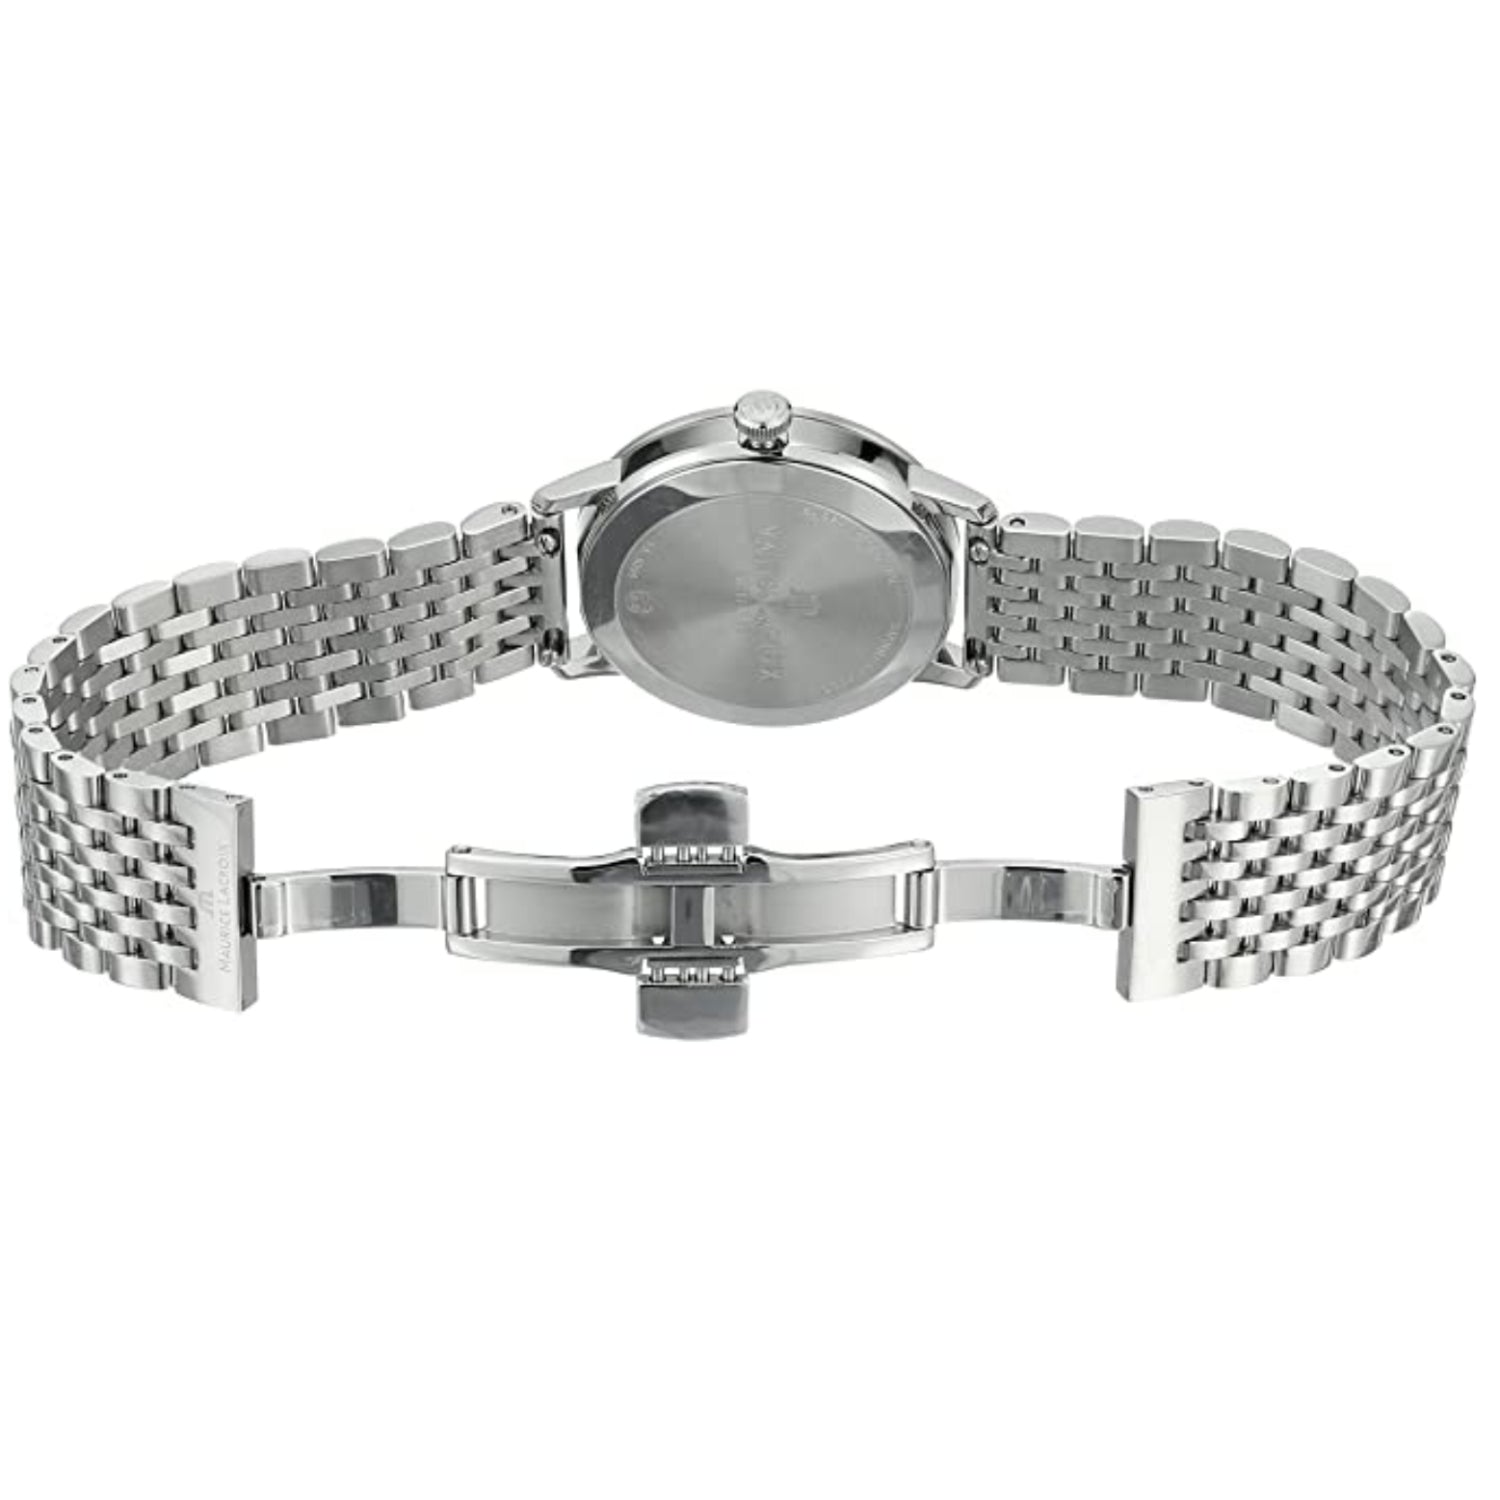 Maurice Lacroix Eliros Date White Dial Silver Steel Strap Watch for Women - EL1094-SS002-150-1